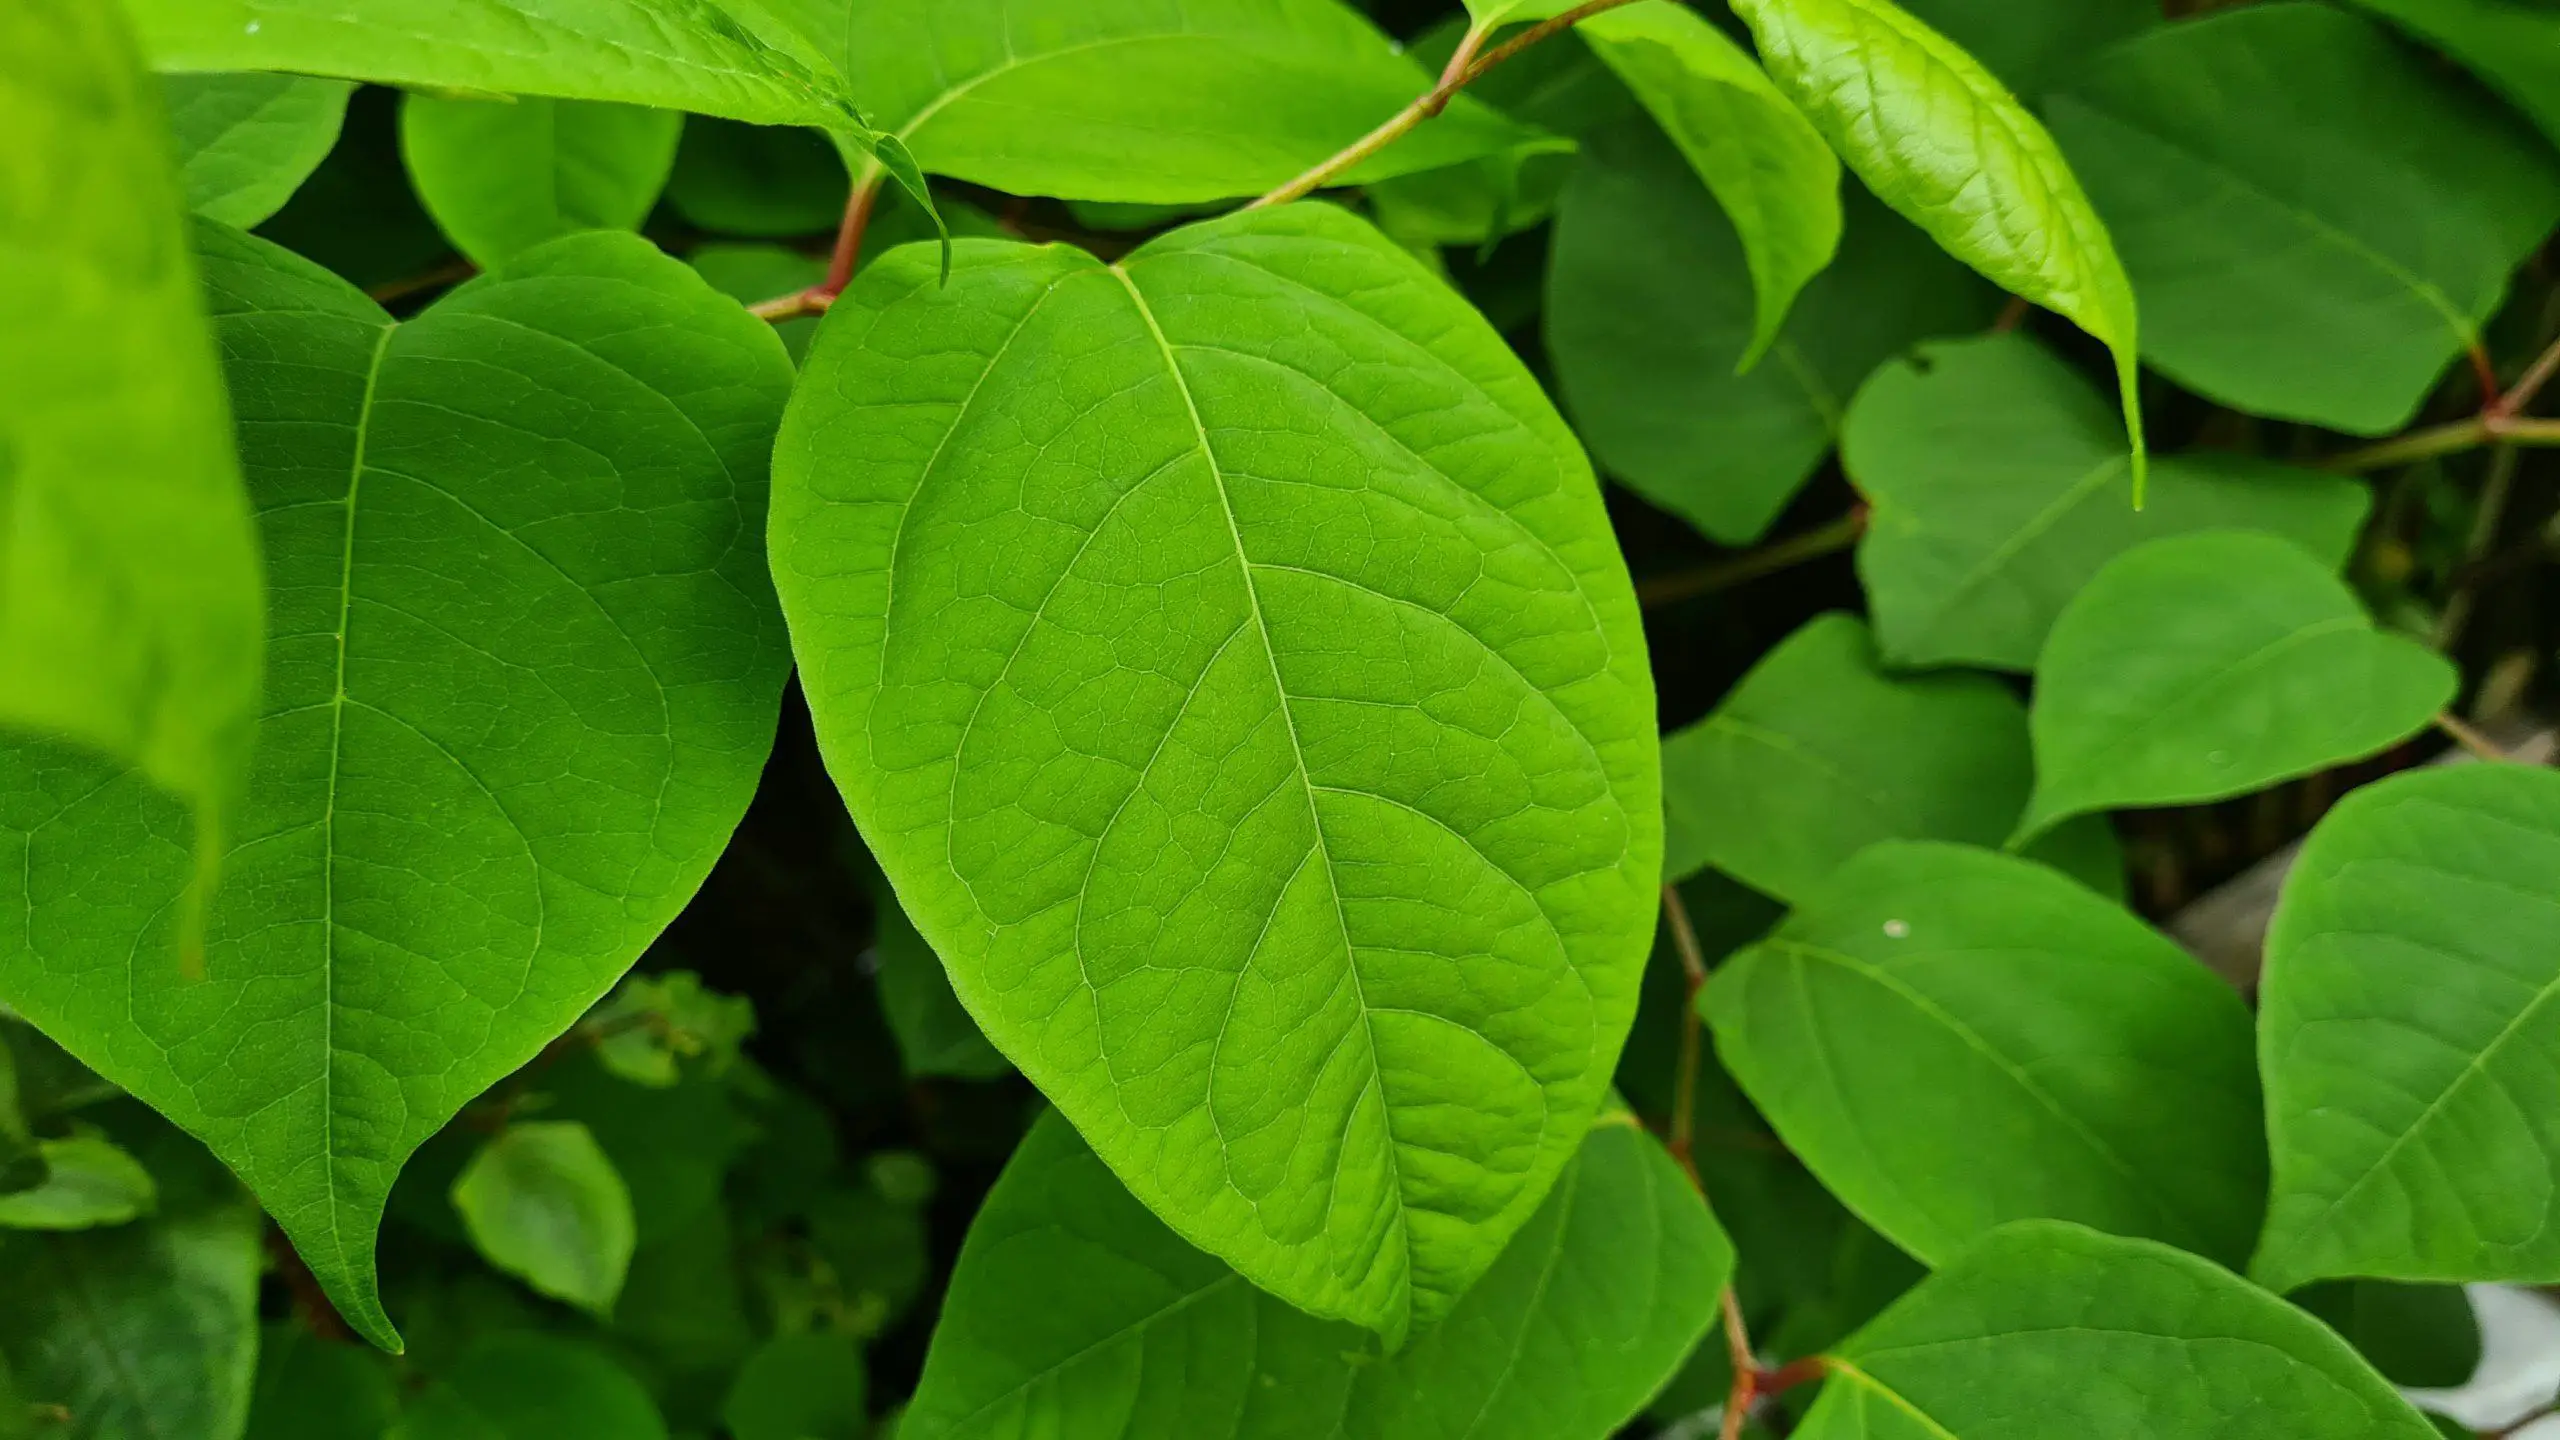 Apply herbicide to the leaves of the Japanese knotweed to kill it